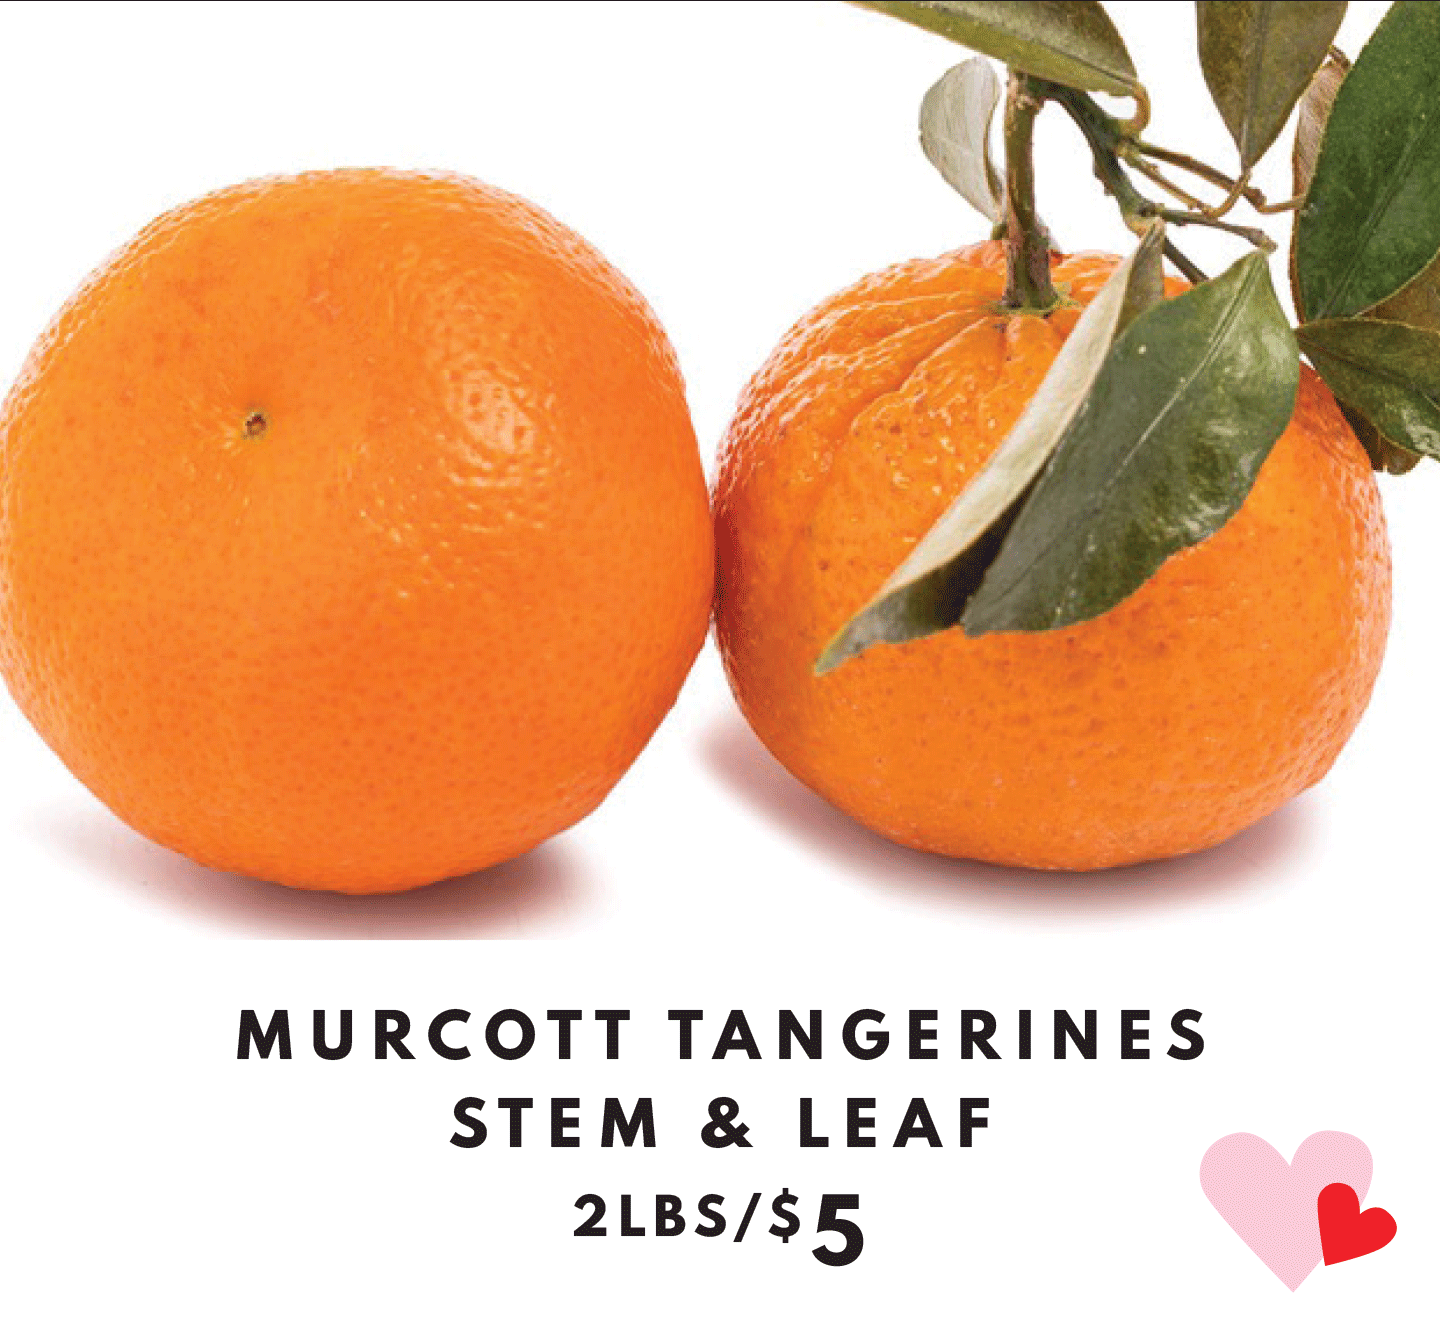 Murcott Tangerines Stem and Leaf - 2 lbs for $5